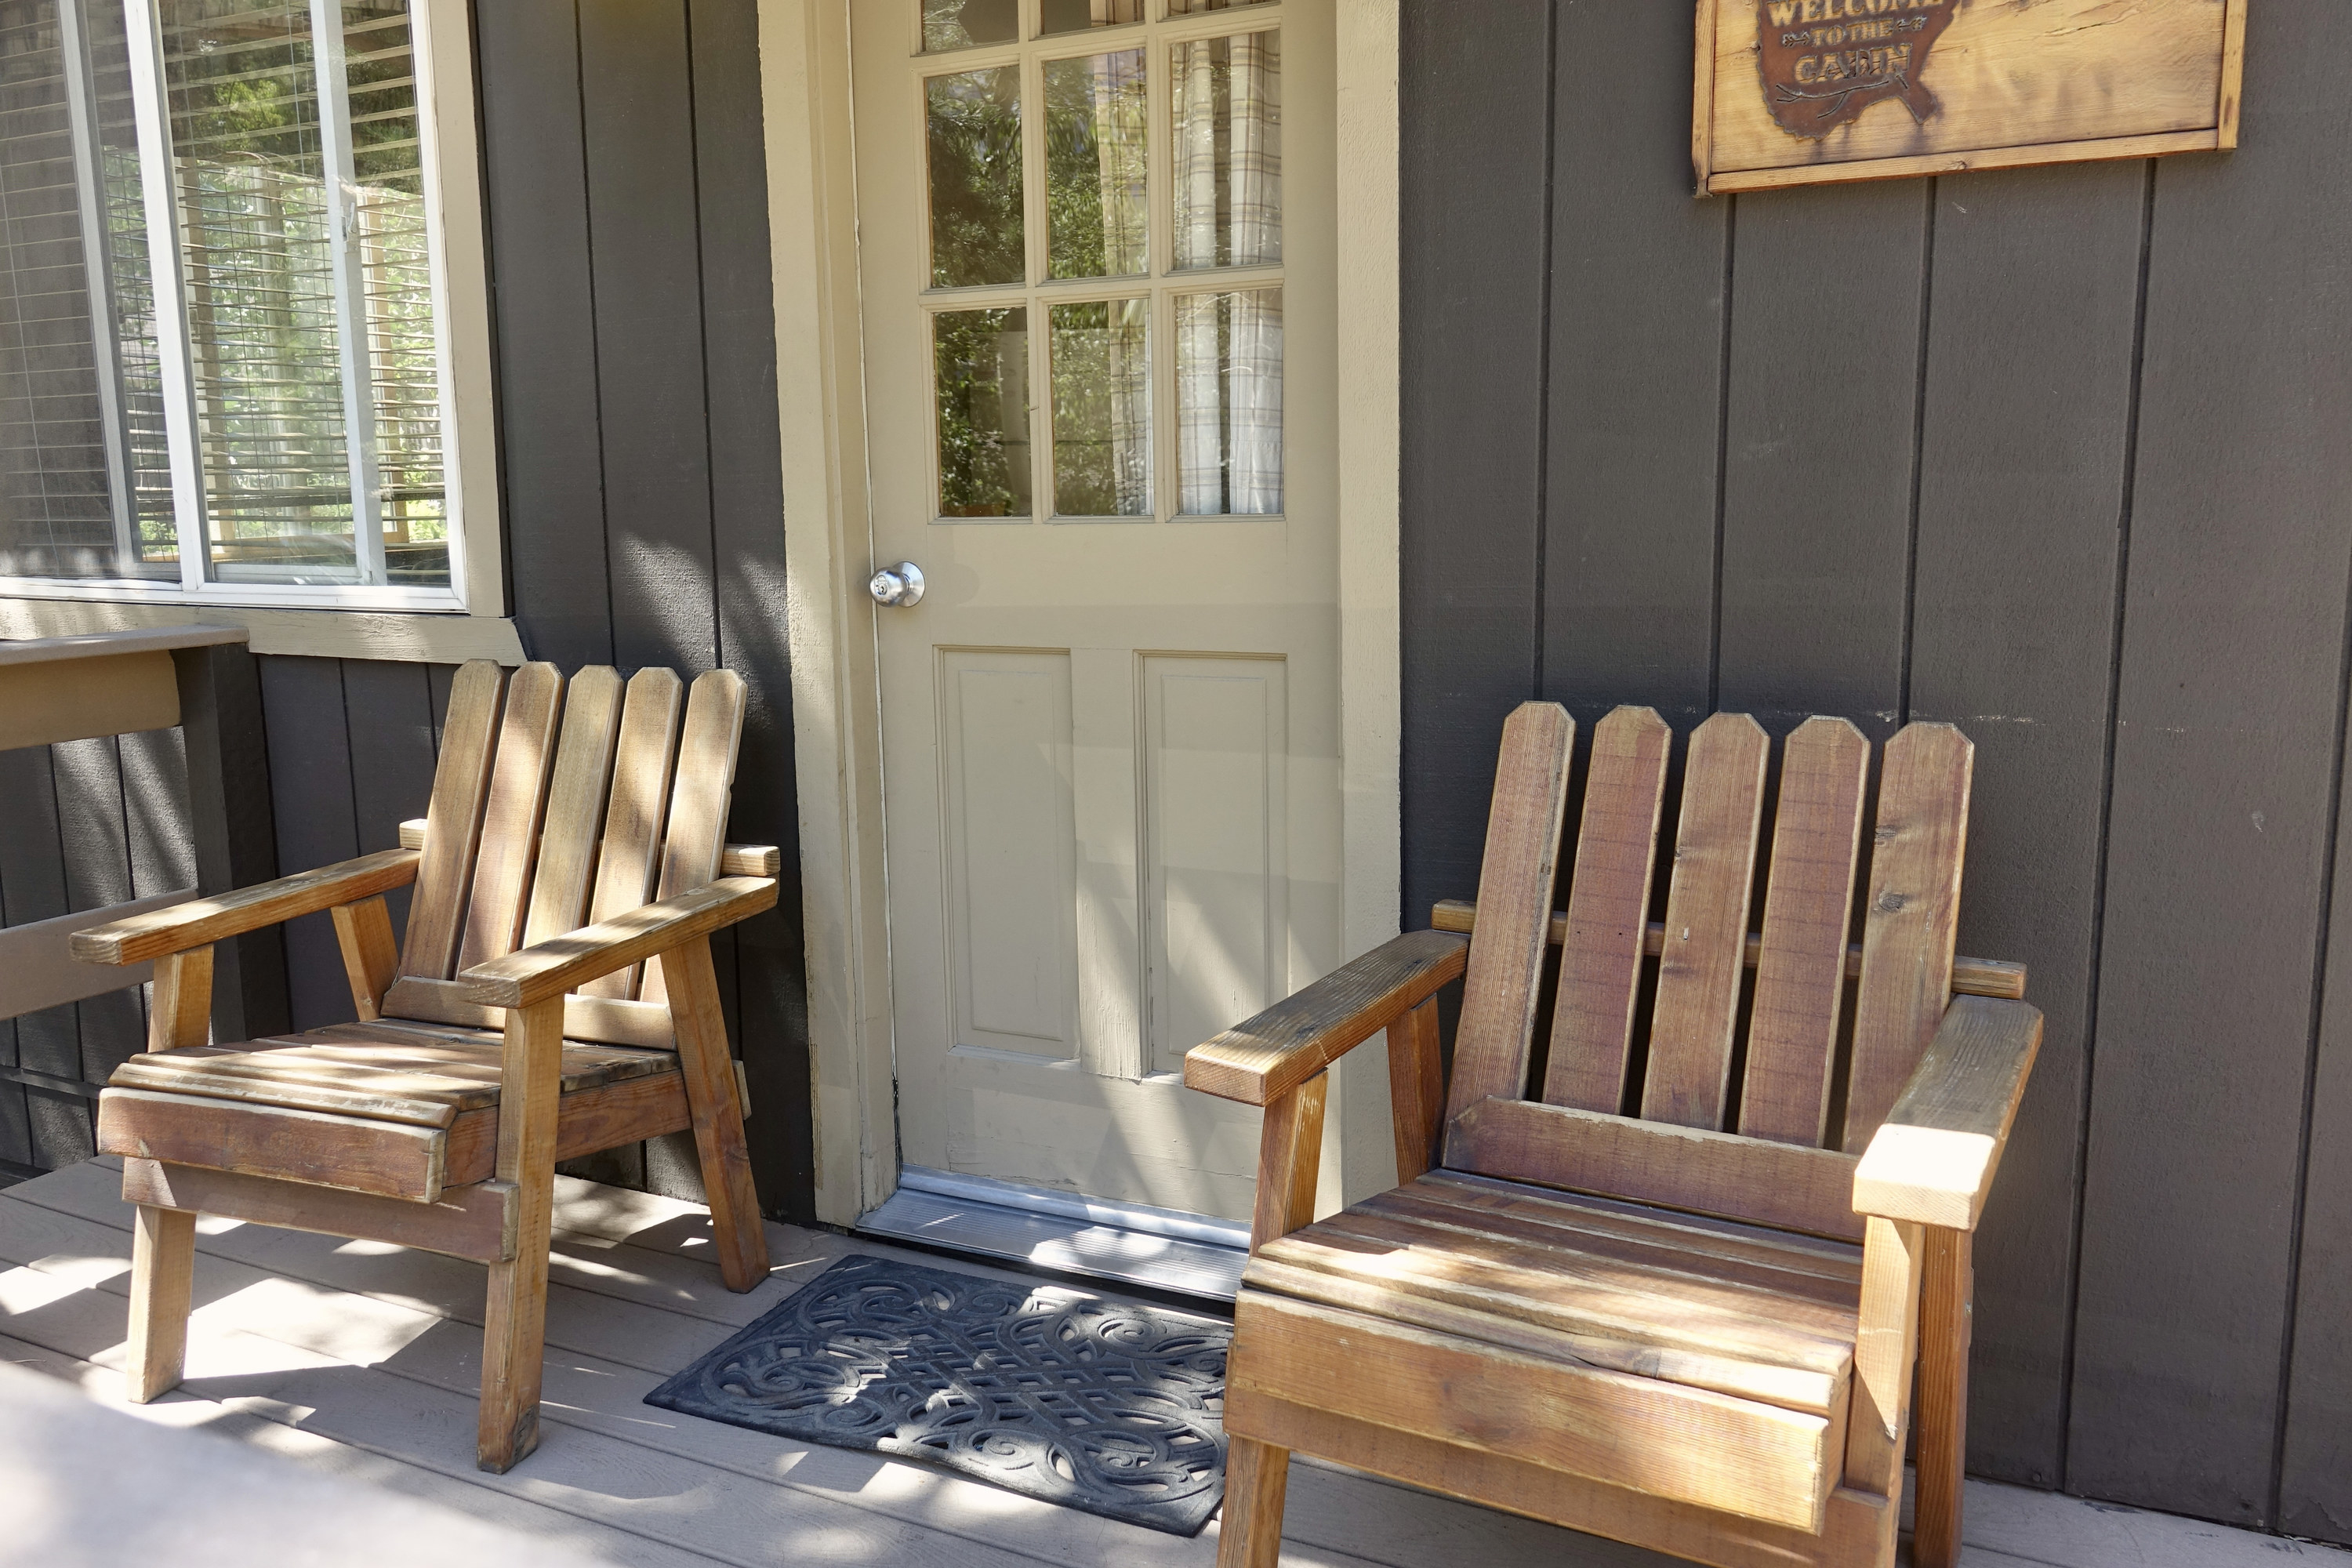 Two chairs on a front porch